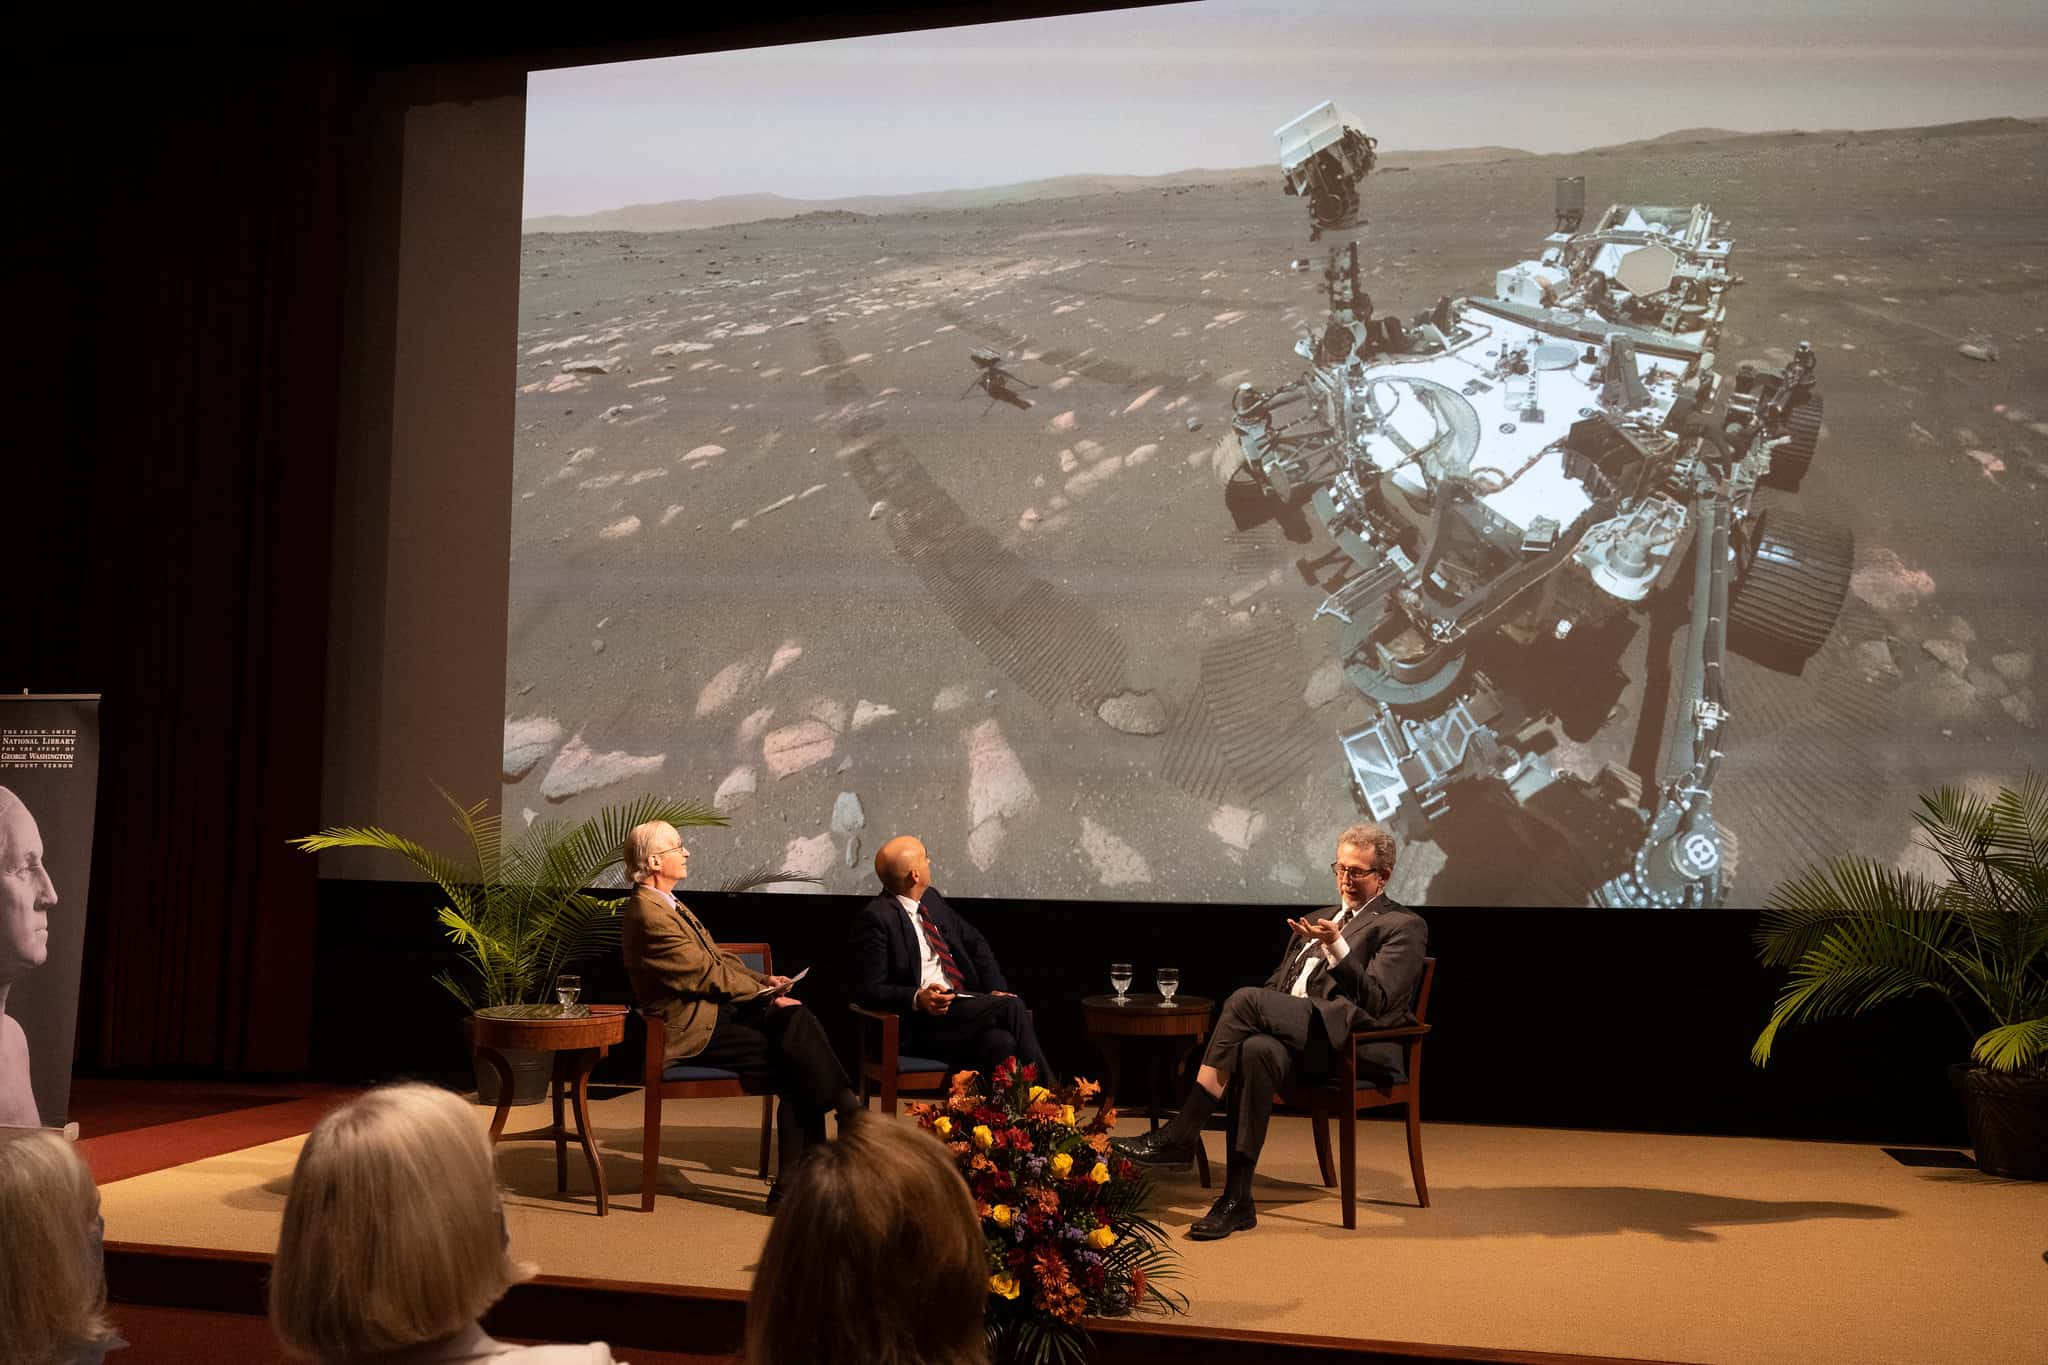 Prof. Sloane, Kevin Butterfield and James Green (NASA) in discussion